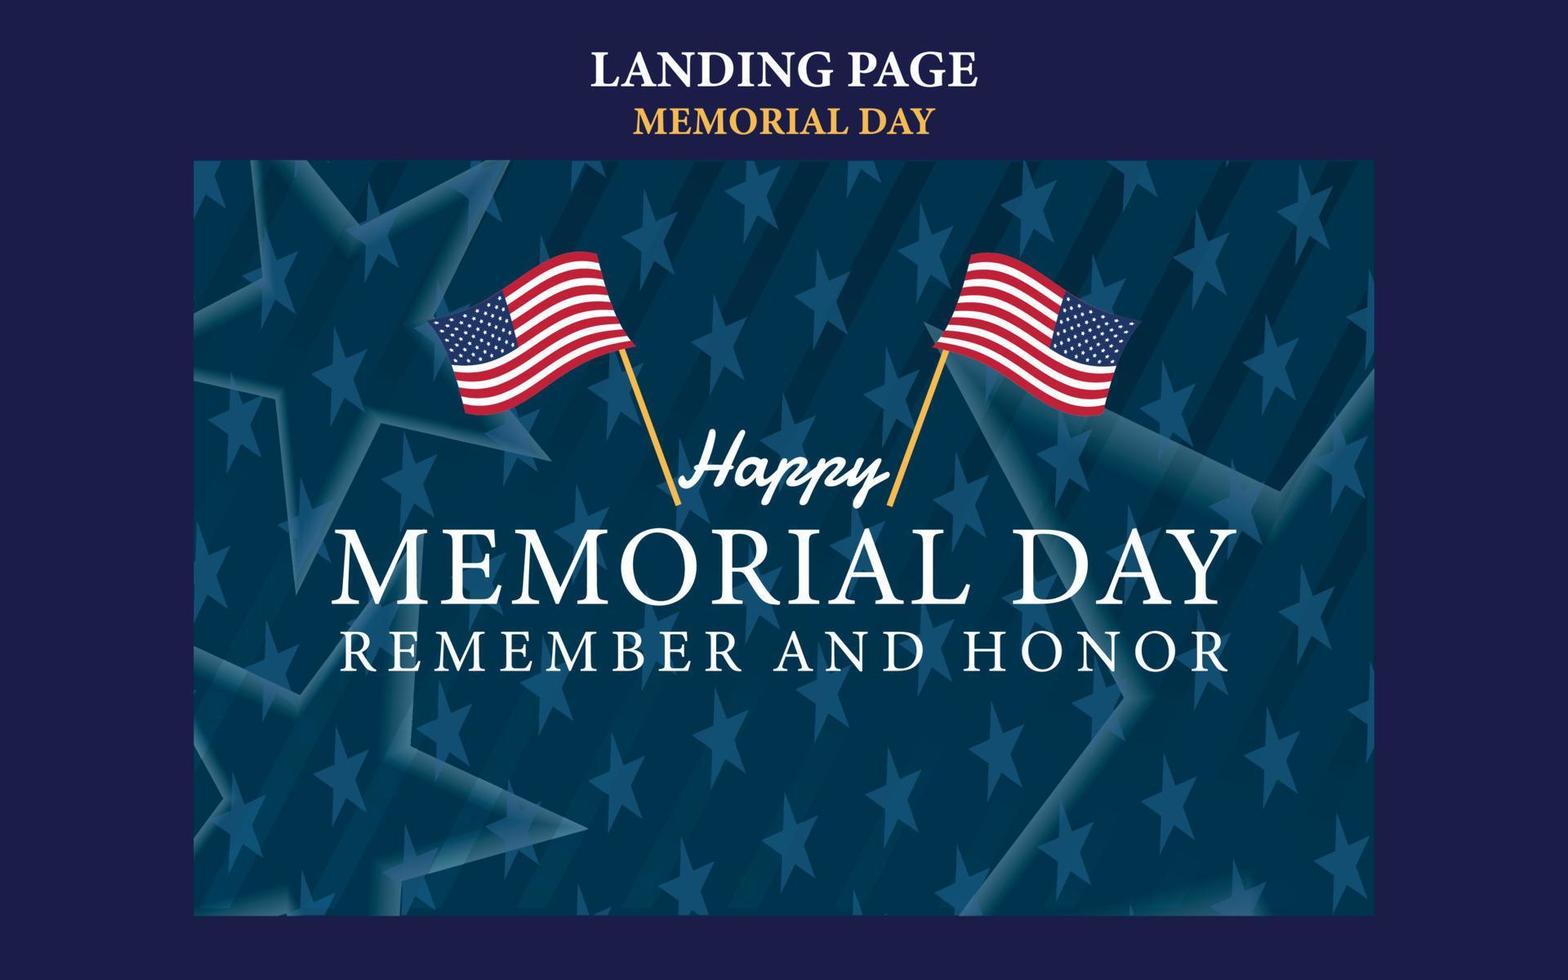 A memorial day banner with american flags independence day vector